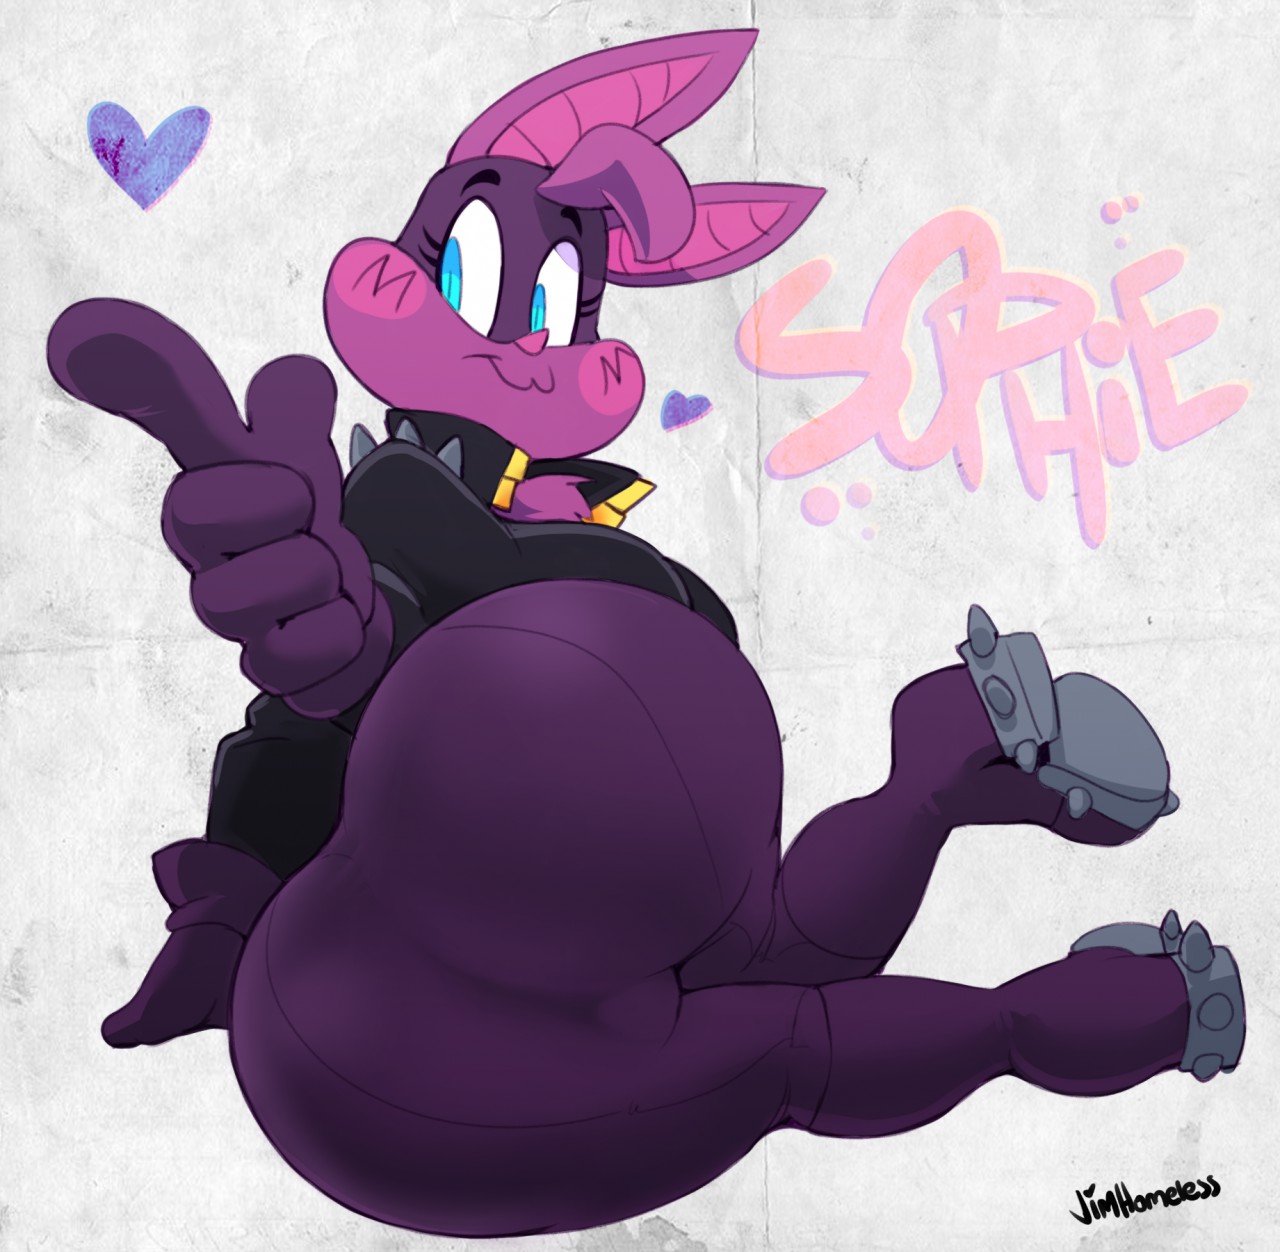 Sophie By Vimhomeless Fur Affinity Dot Net.